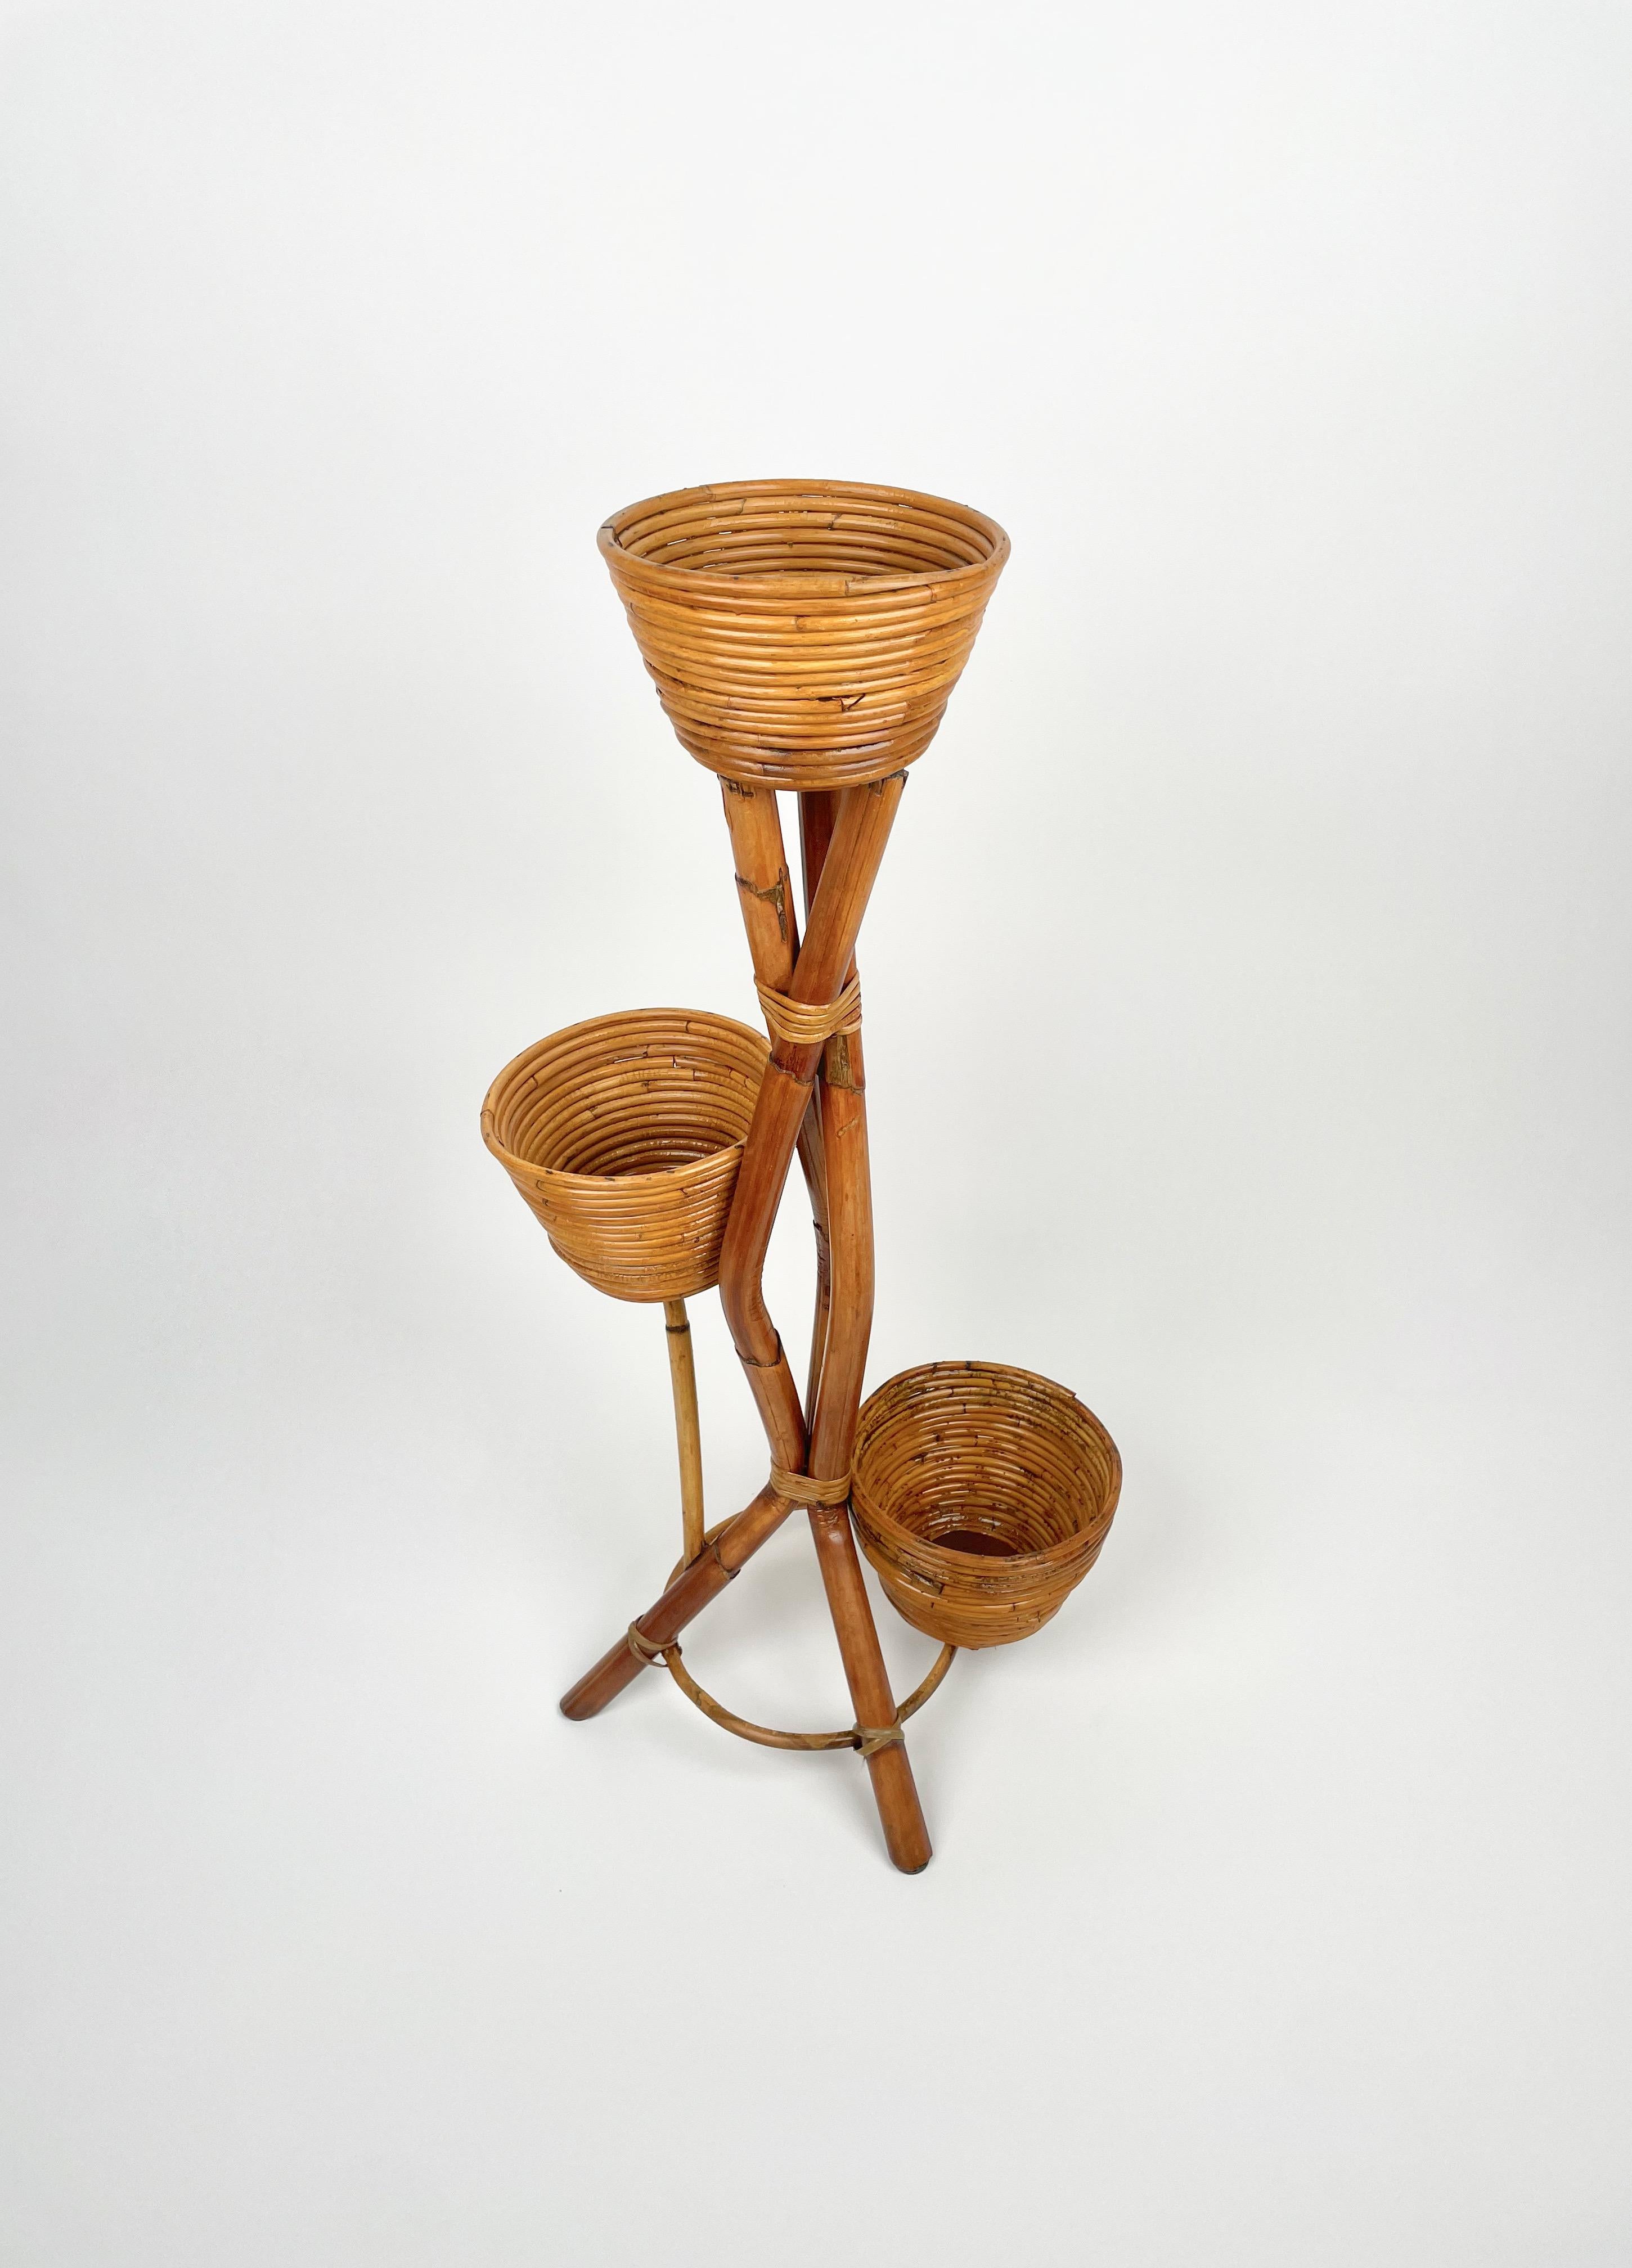 Flower stand or plants holders in rattan and bamboo featuring three vases.

Bamboo / rattan has been polished by a professional restorer.

Made in Italy in the 1960s.
 